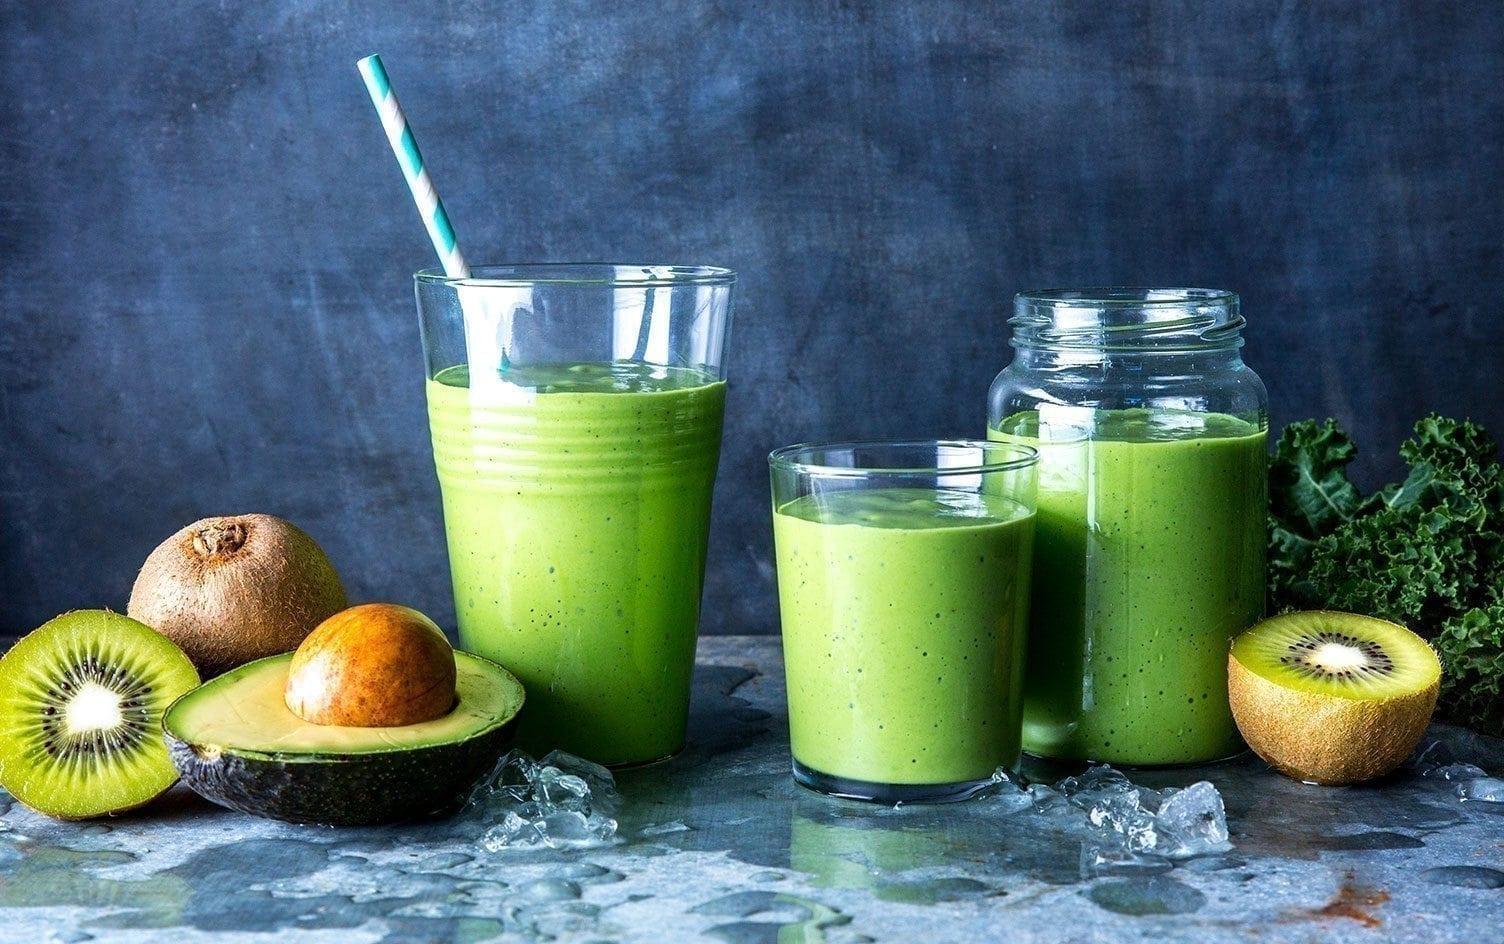 Avocado, Kale and Spinach Smoothie